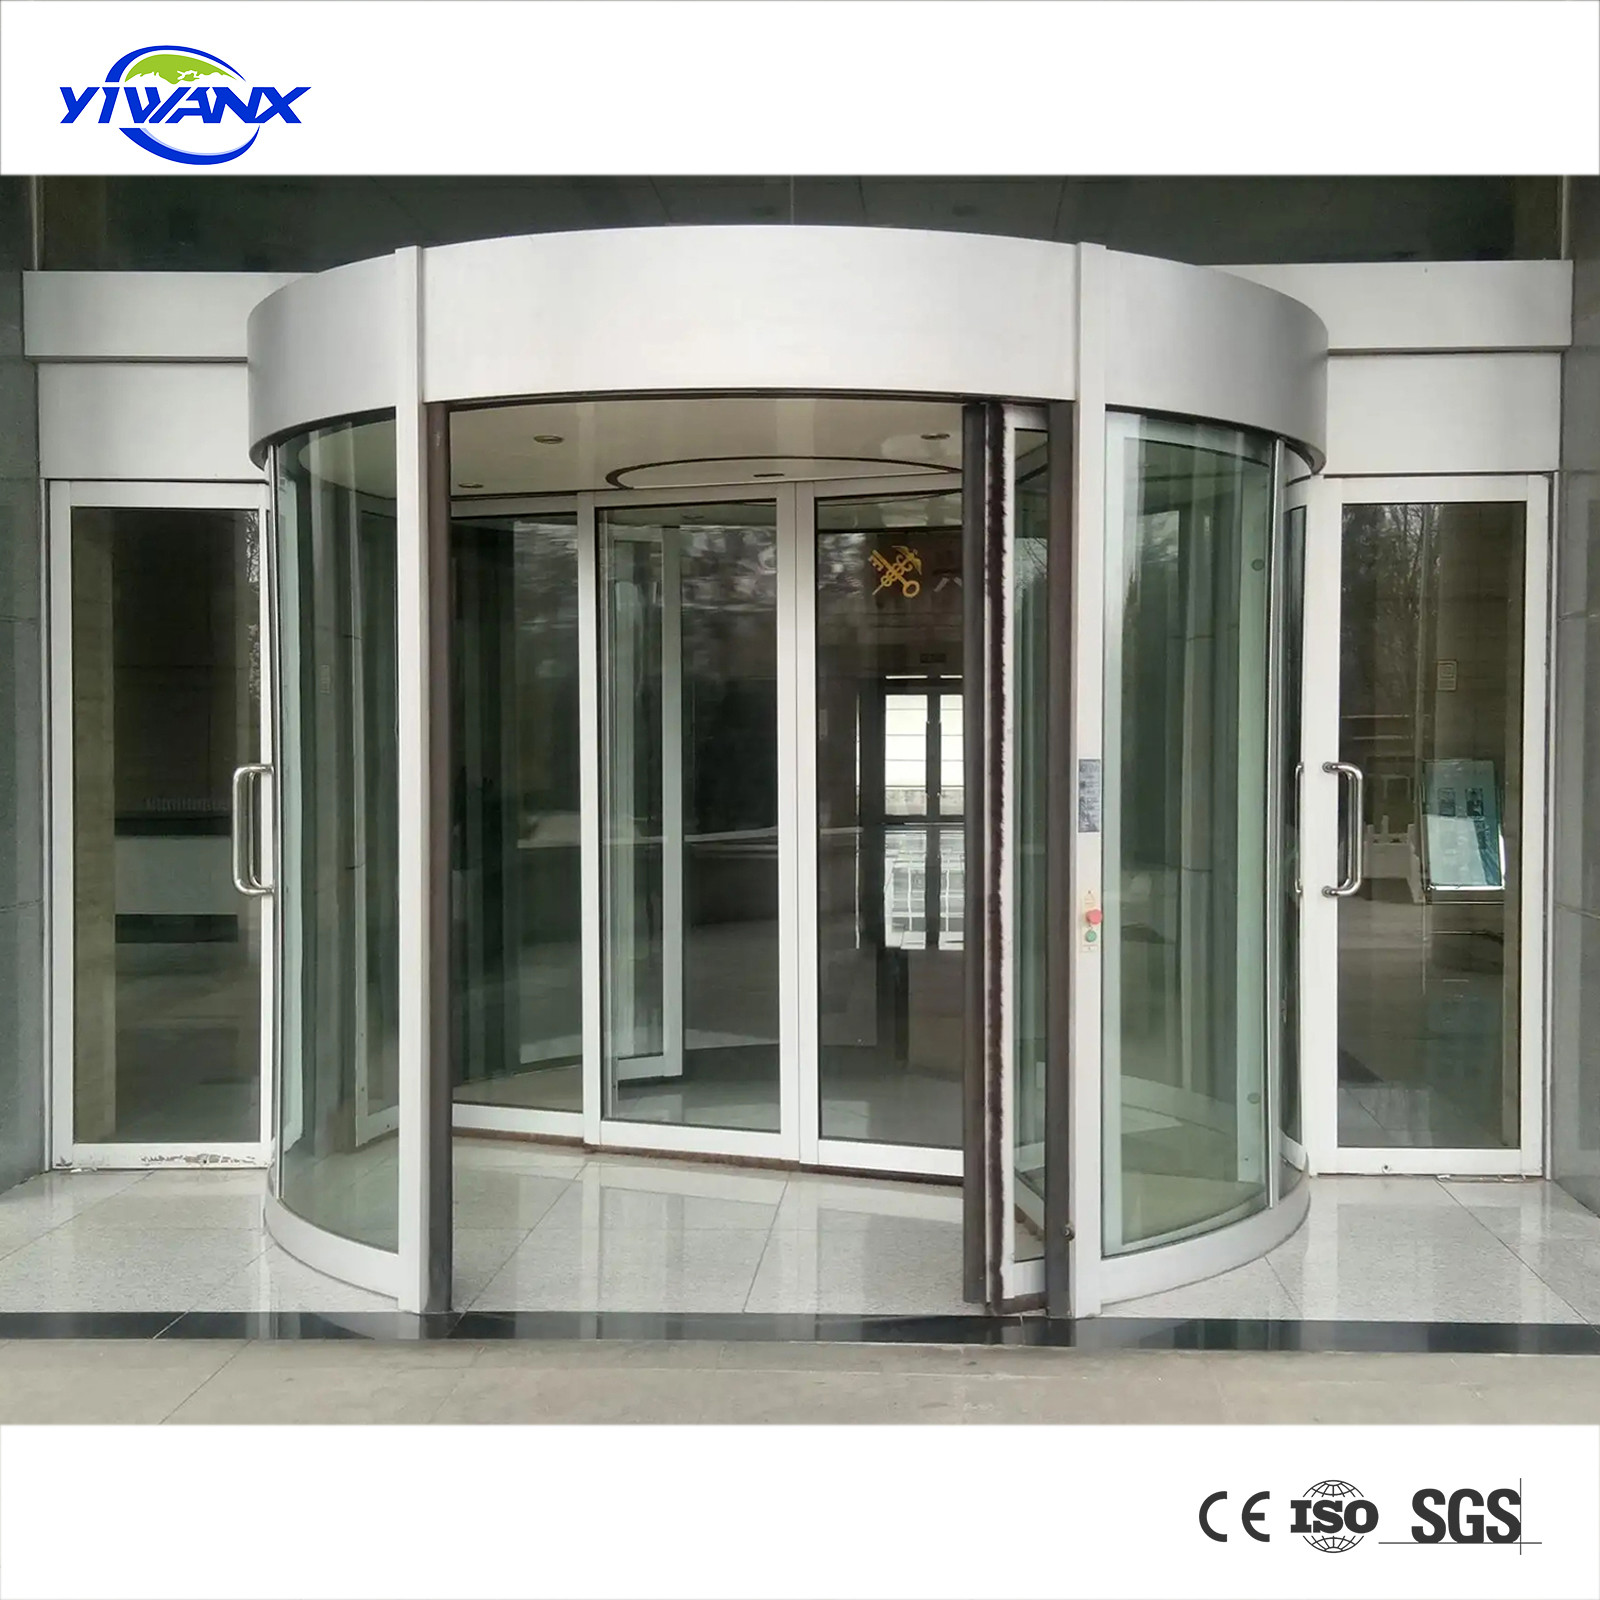 Variety of Materials and Colors Available for Automatic Revolving Door